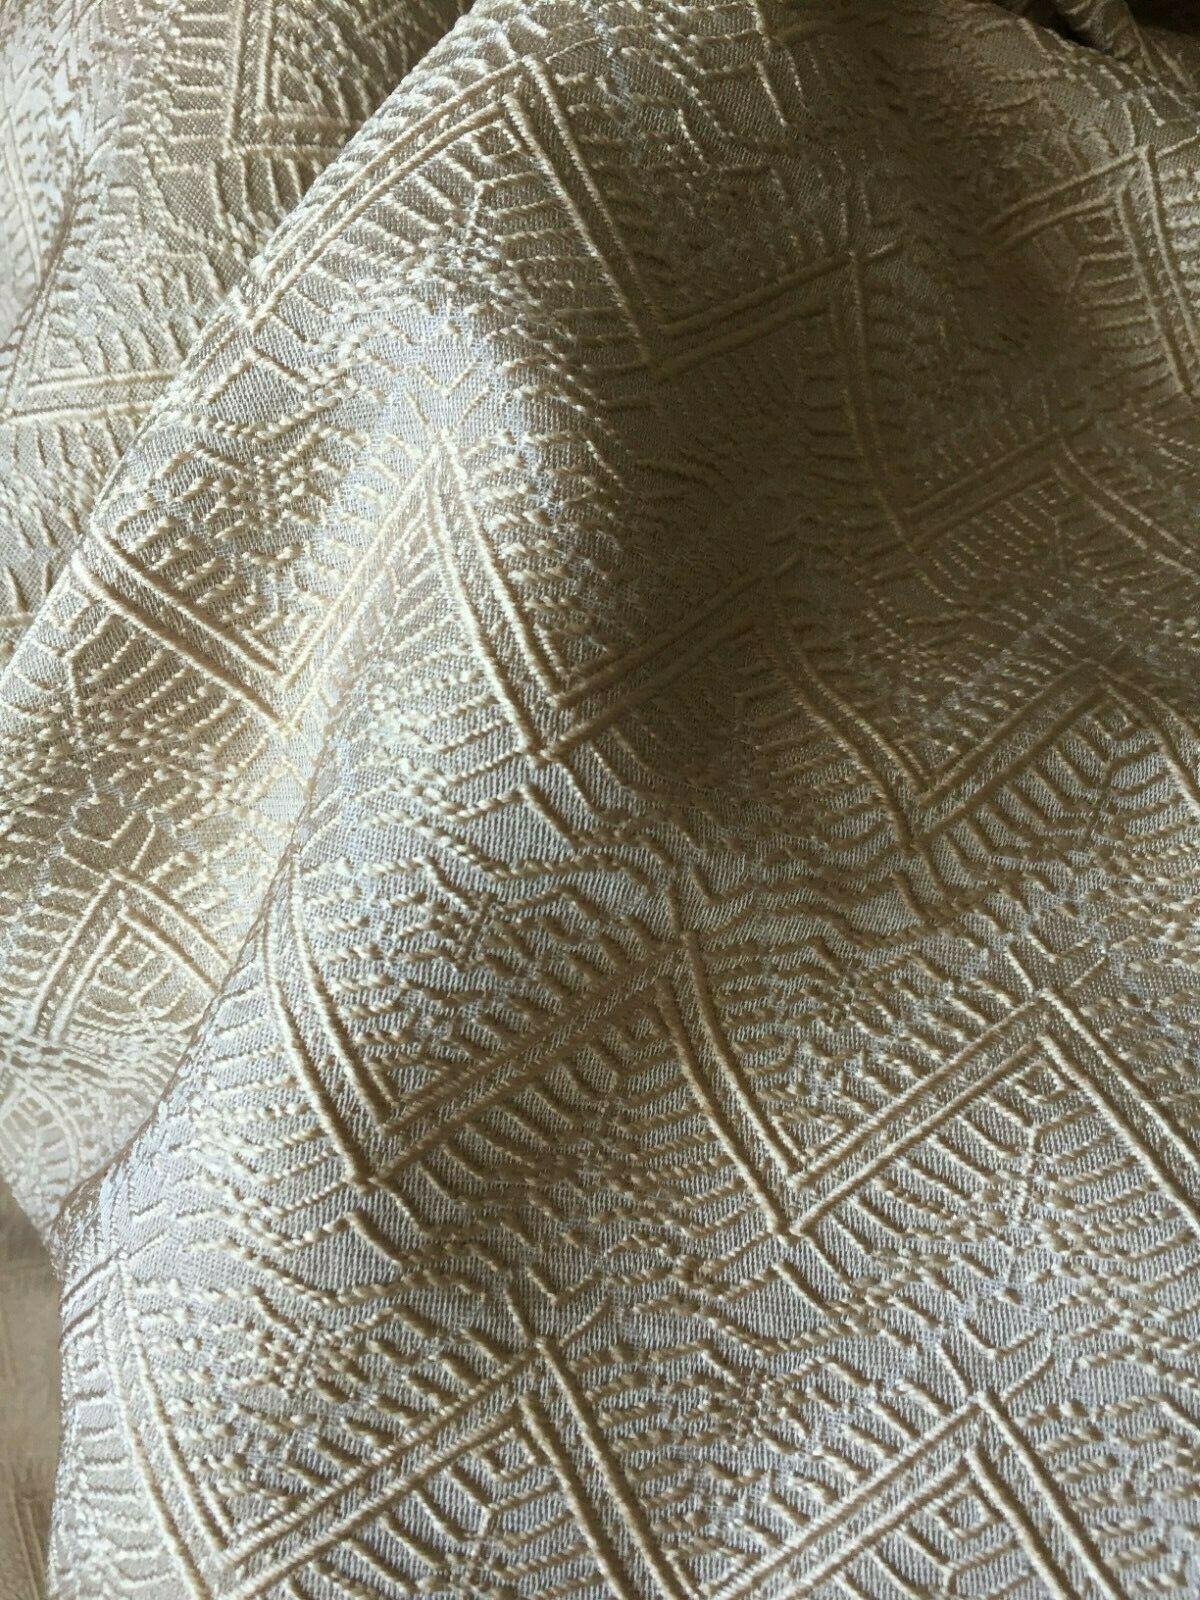 Curtain Upholstery Jacquard ONLY £19.99 per M fabric 300cm/118" Beige&Vintage